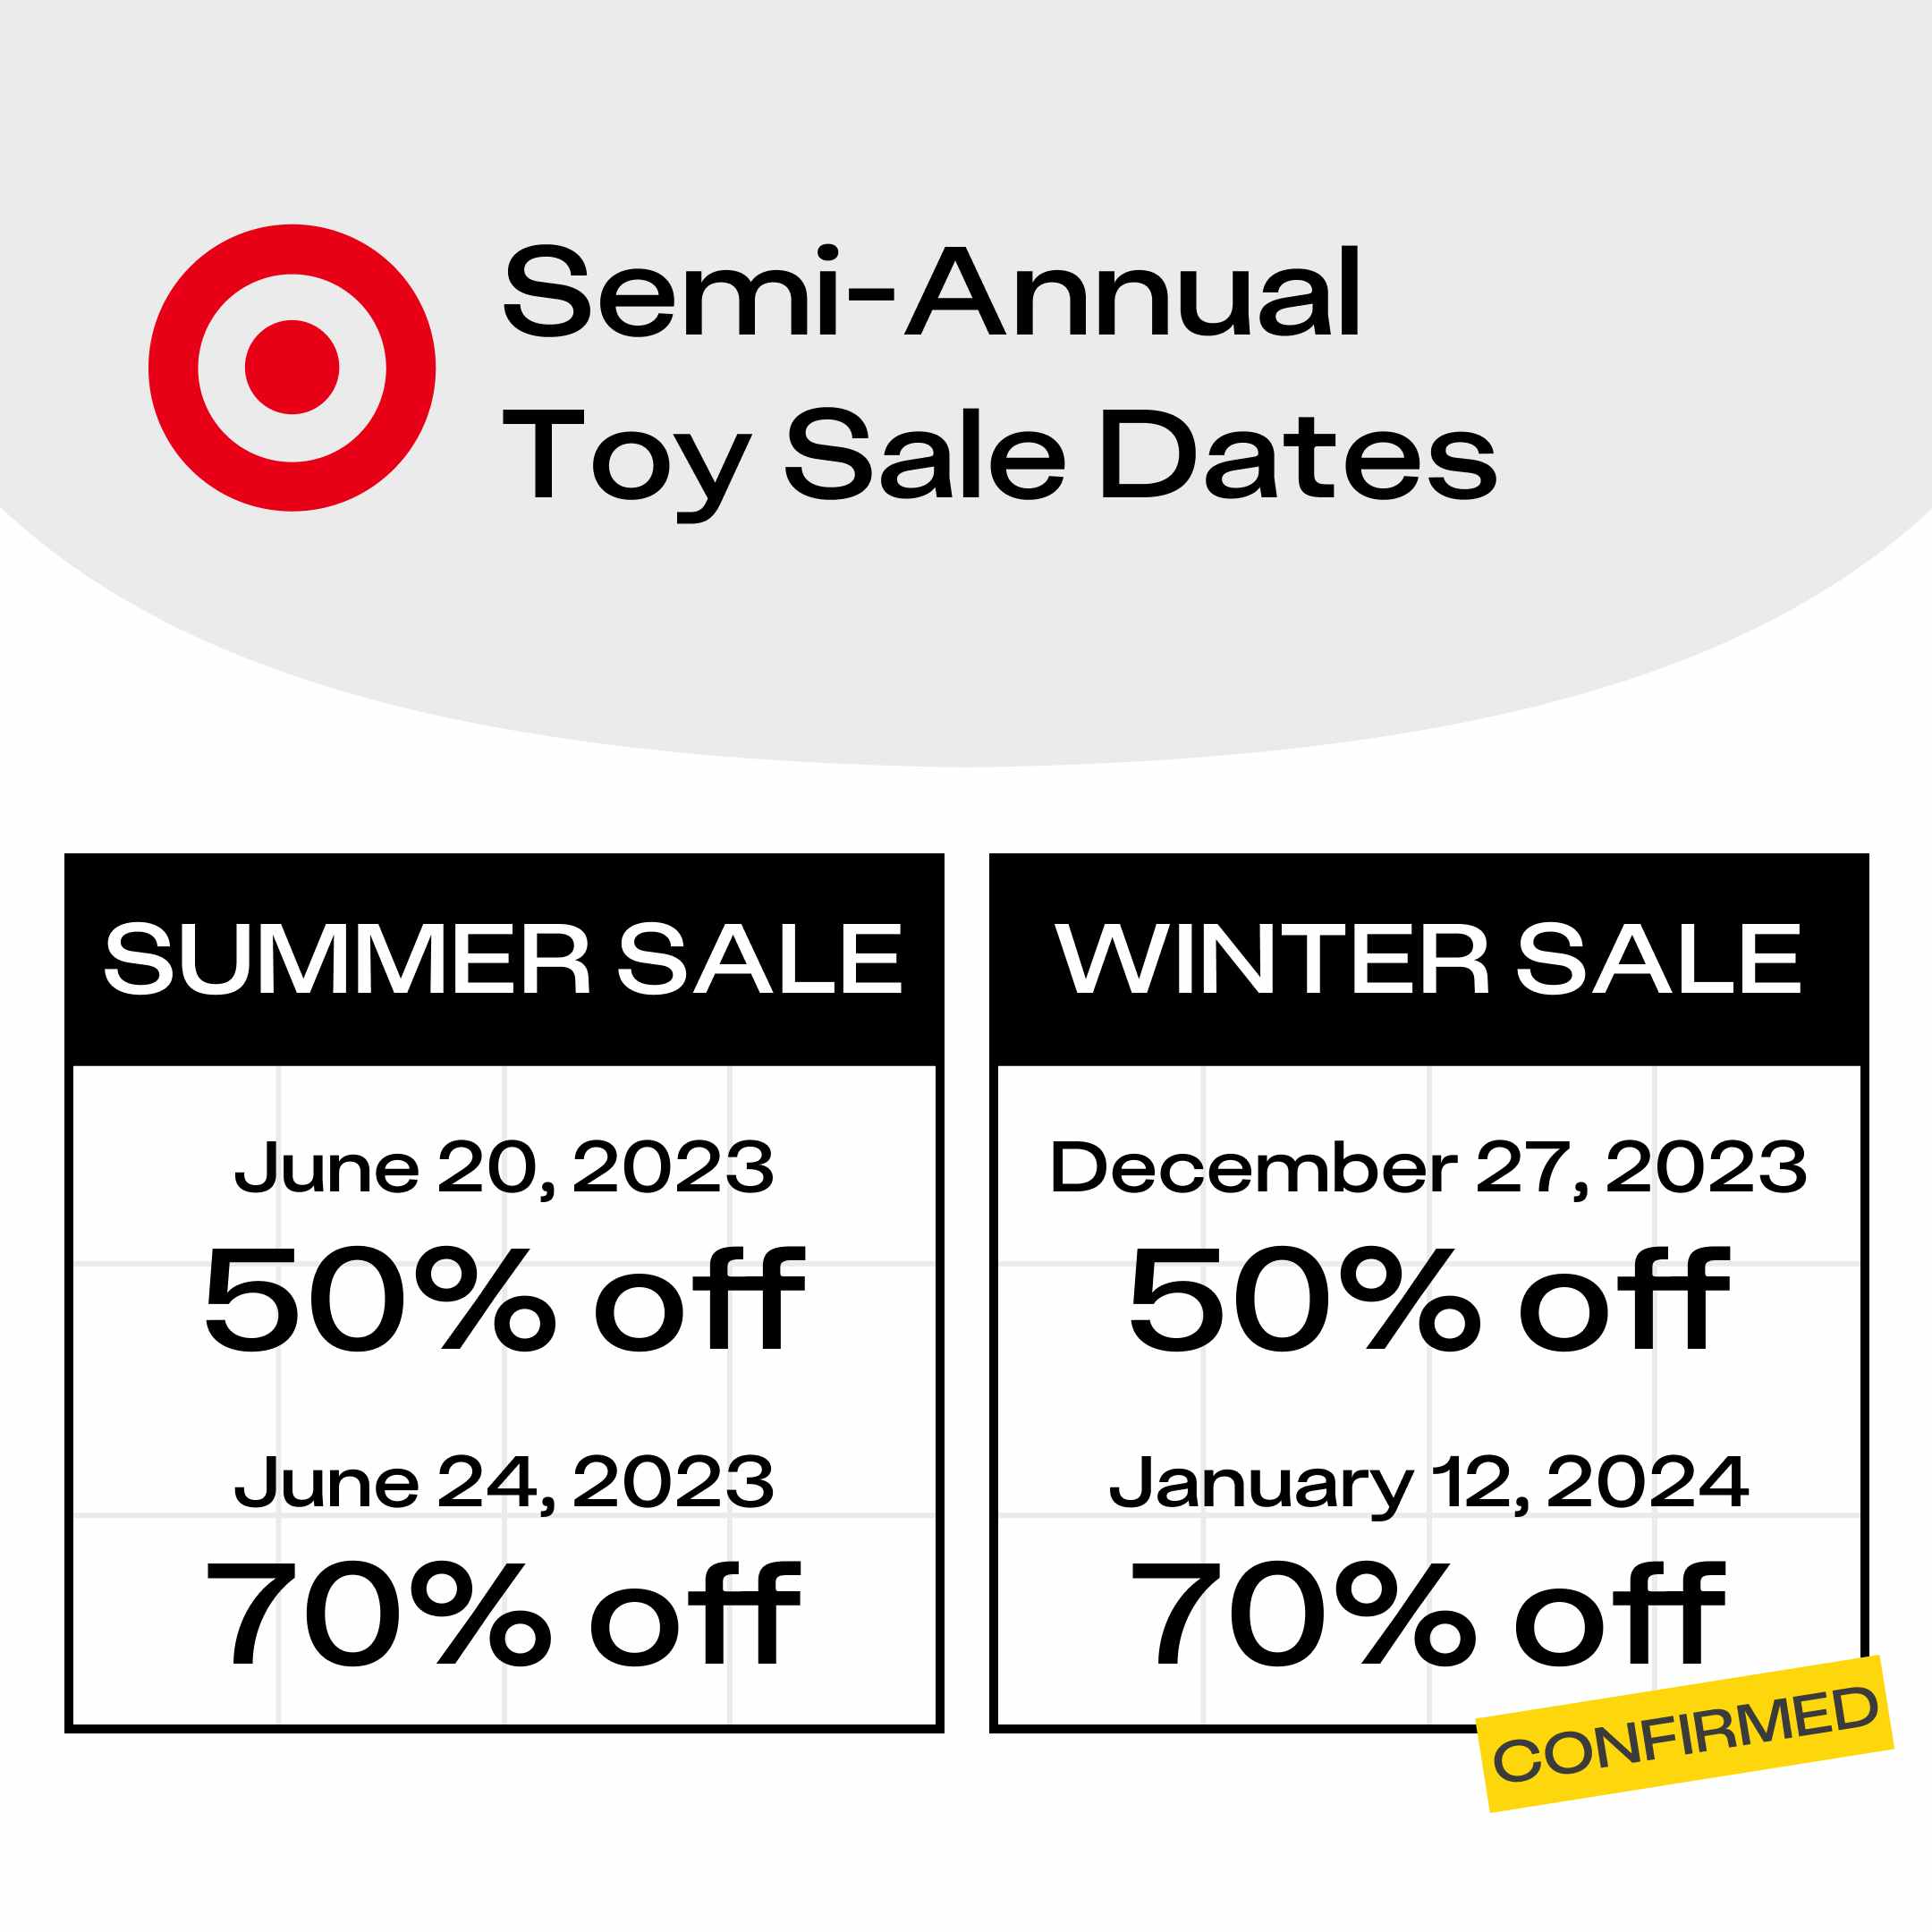 Target semi annual toy sale dates 2023 - 2024